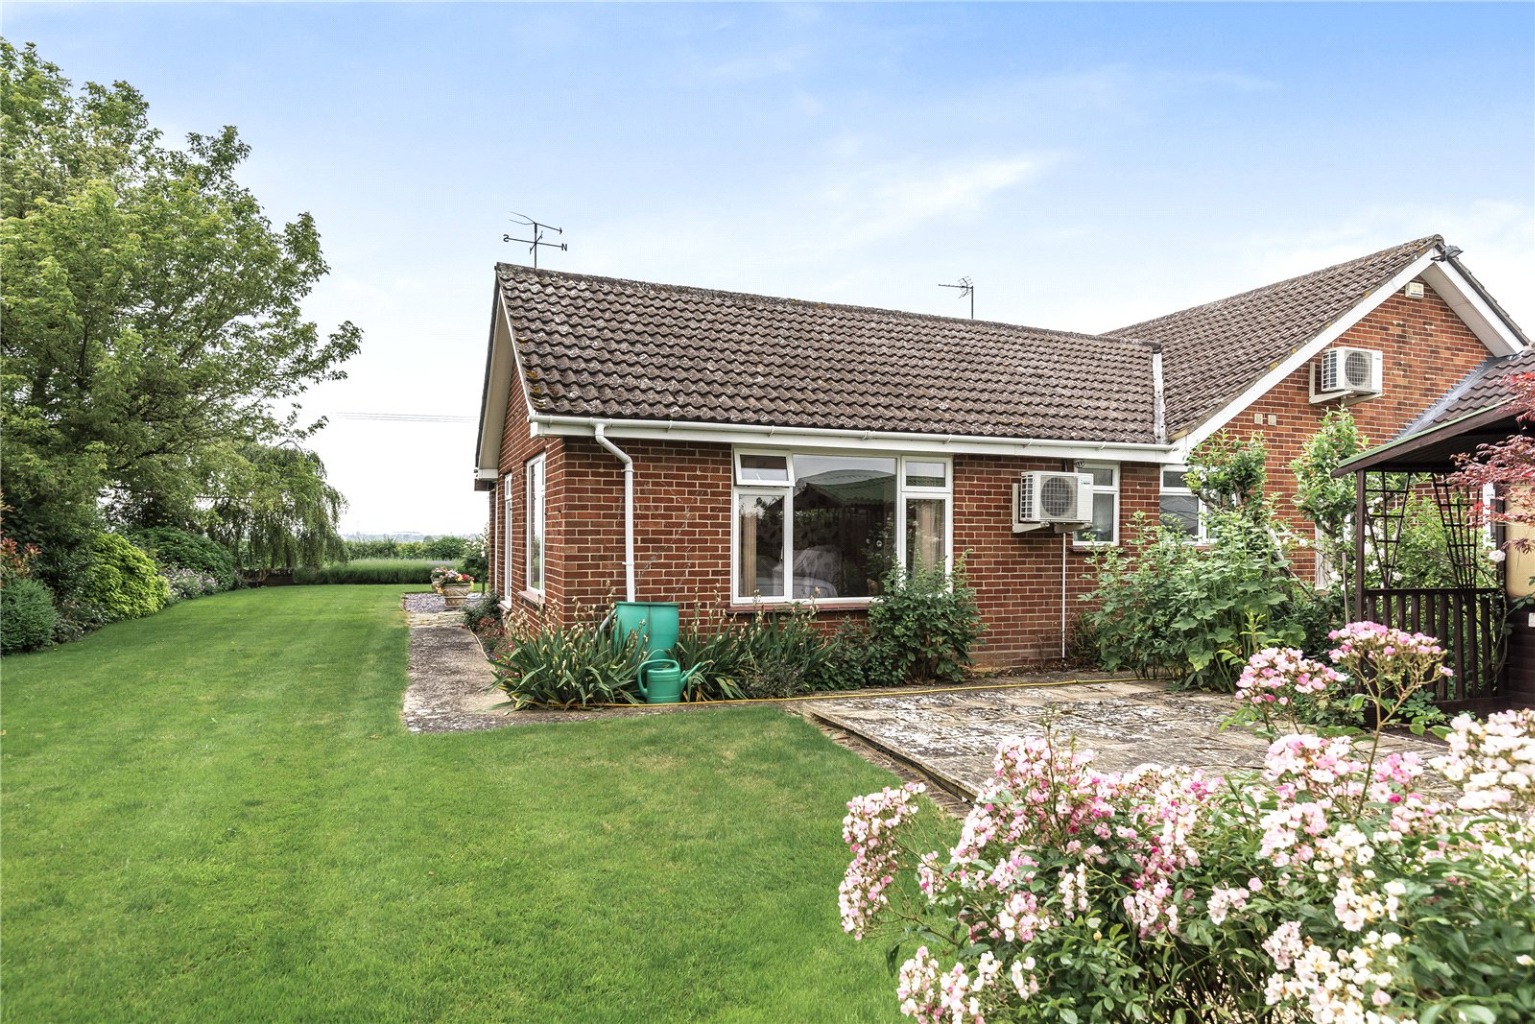 3 bed detached house for sale in Wintringham, St. Neots  - Property Image 3